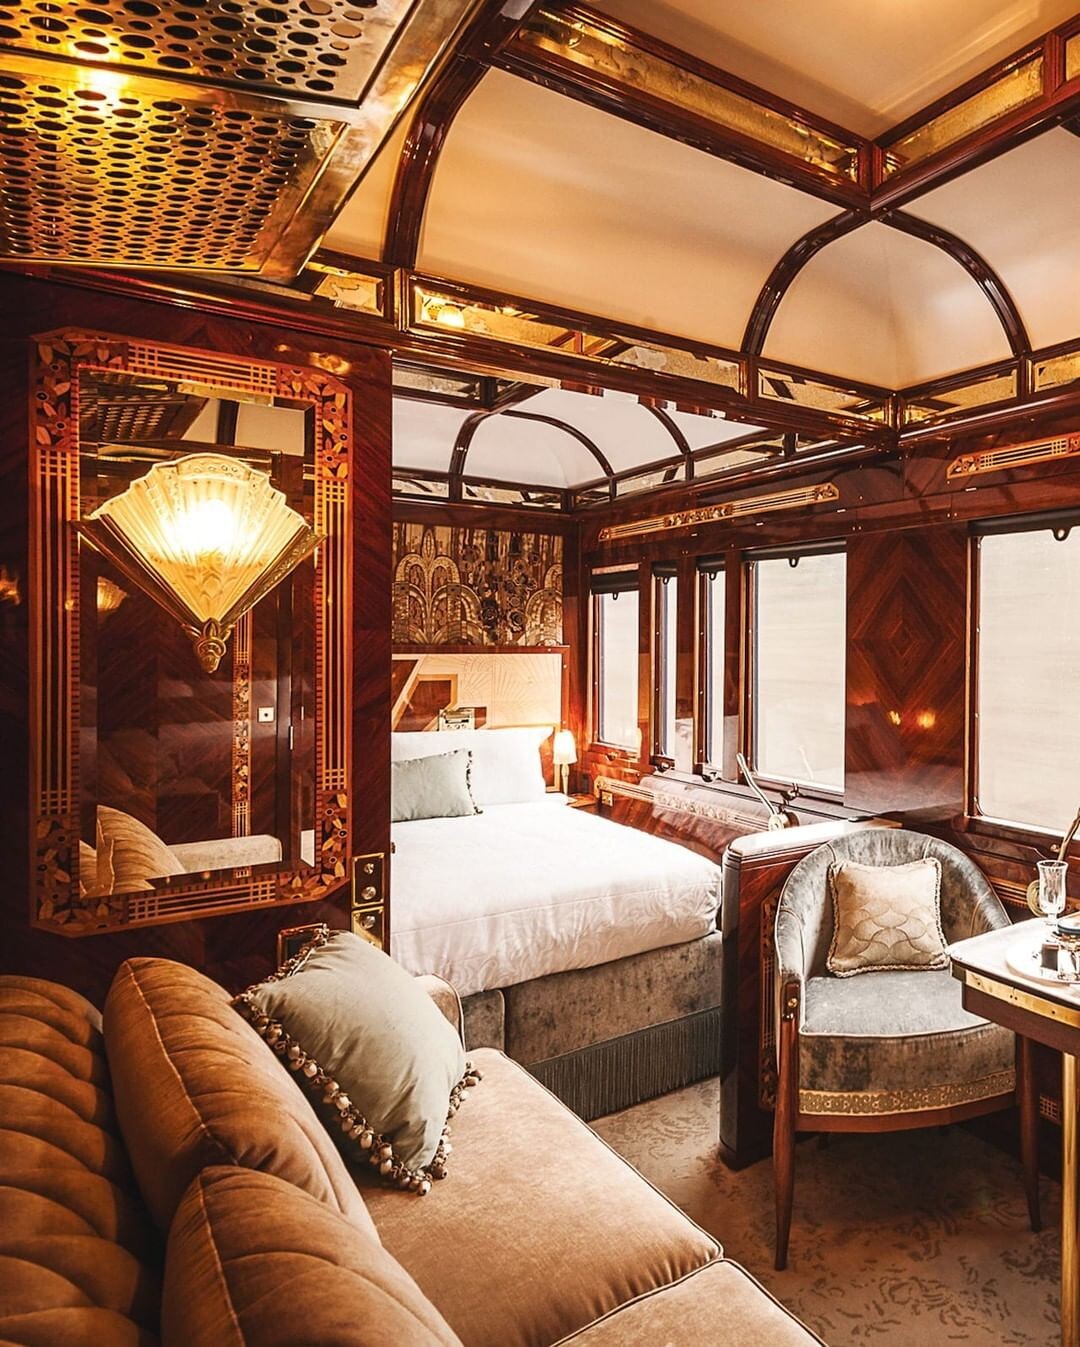 Eight luxury hotels are using their power and grand spaces for a good cause during the global pandemic. Photo: @belmond/Instagram